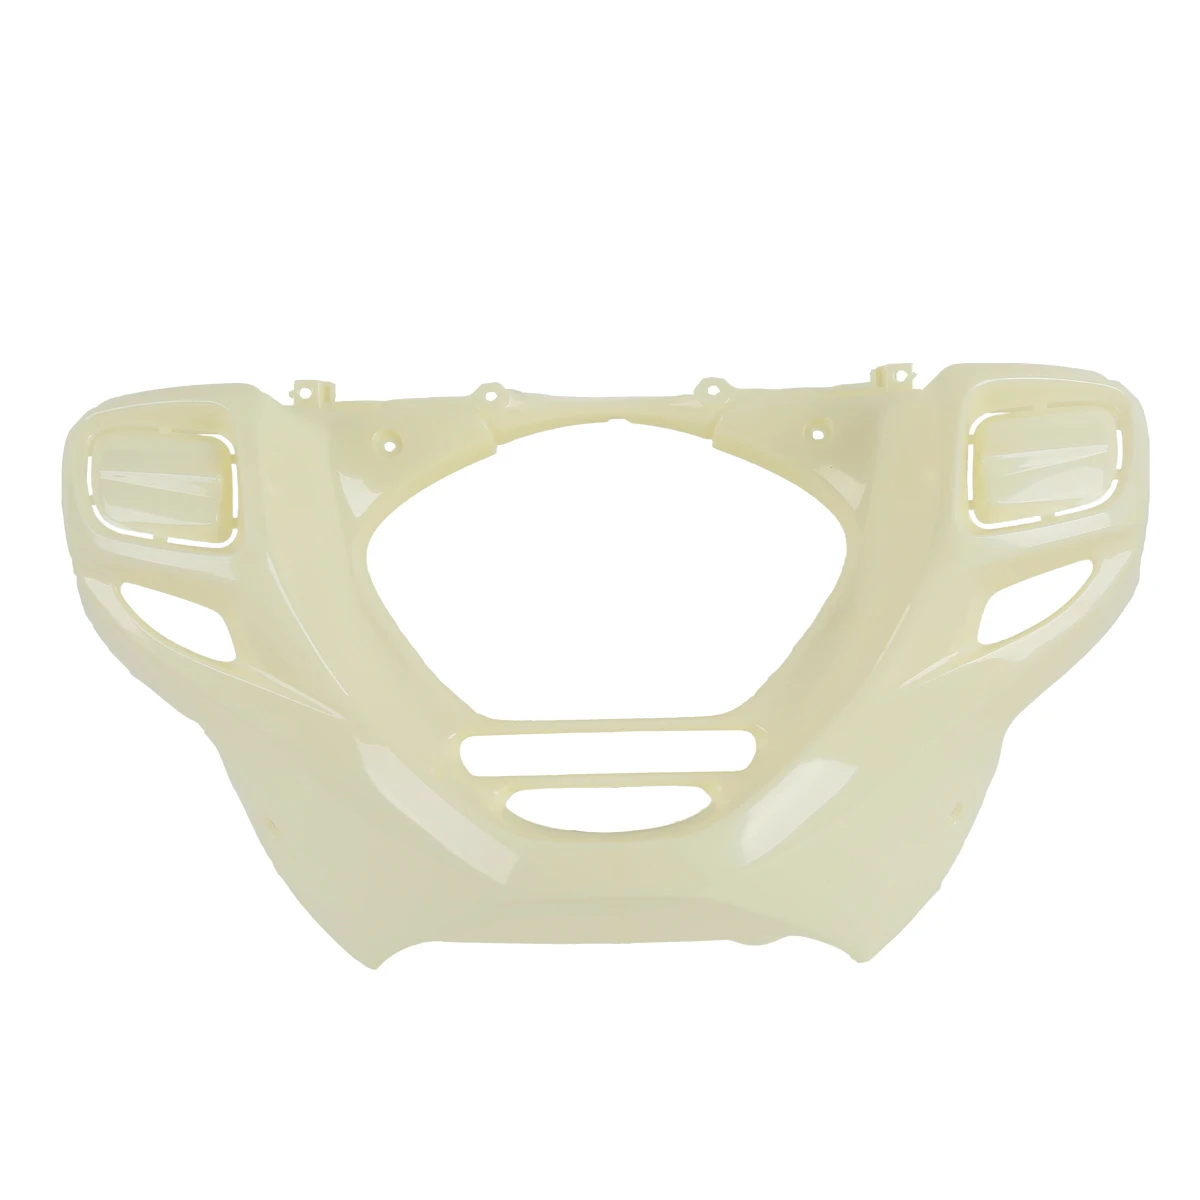 

Motorcycle Front Lower Cowl Fairing For Honda Goldwing GL1800 2012-2017 F6B 2013-2017 2016 2015 2014 Plastic 4 Colors